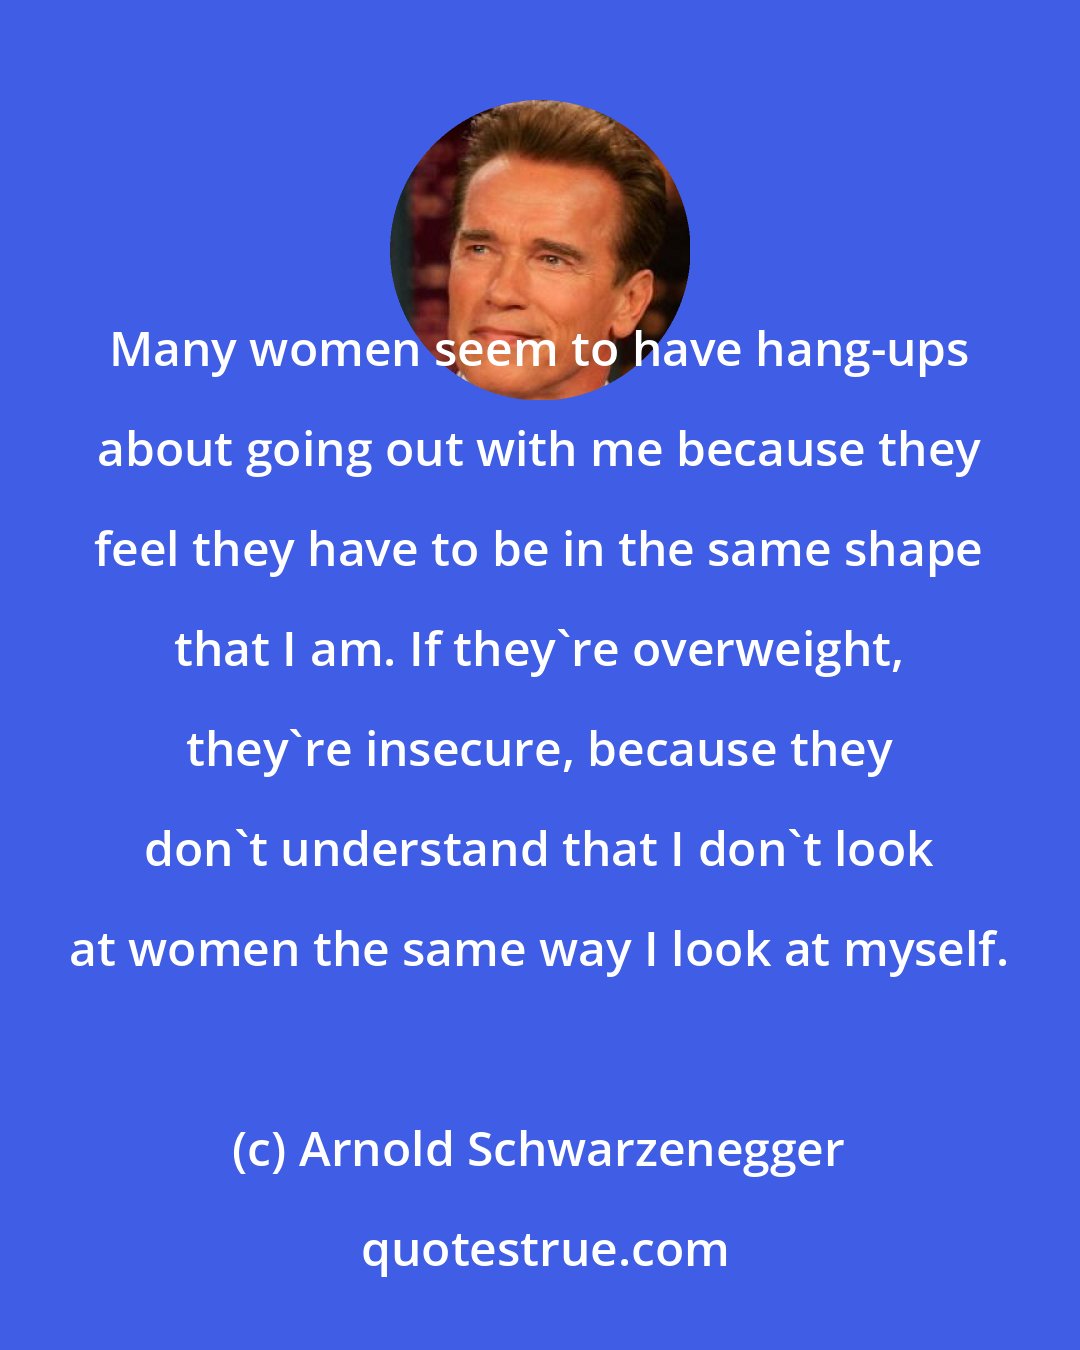 Arnold Schwarzenegger: Many women seem to have hang-ups about going out with me because they feel they have to be in the same shape that I am. If they're overweight, they're insecure, because they don't understand that I don't look at women the same way I look at myself.